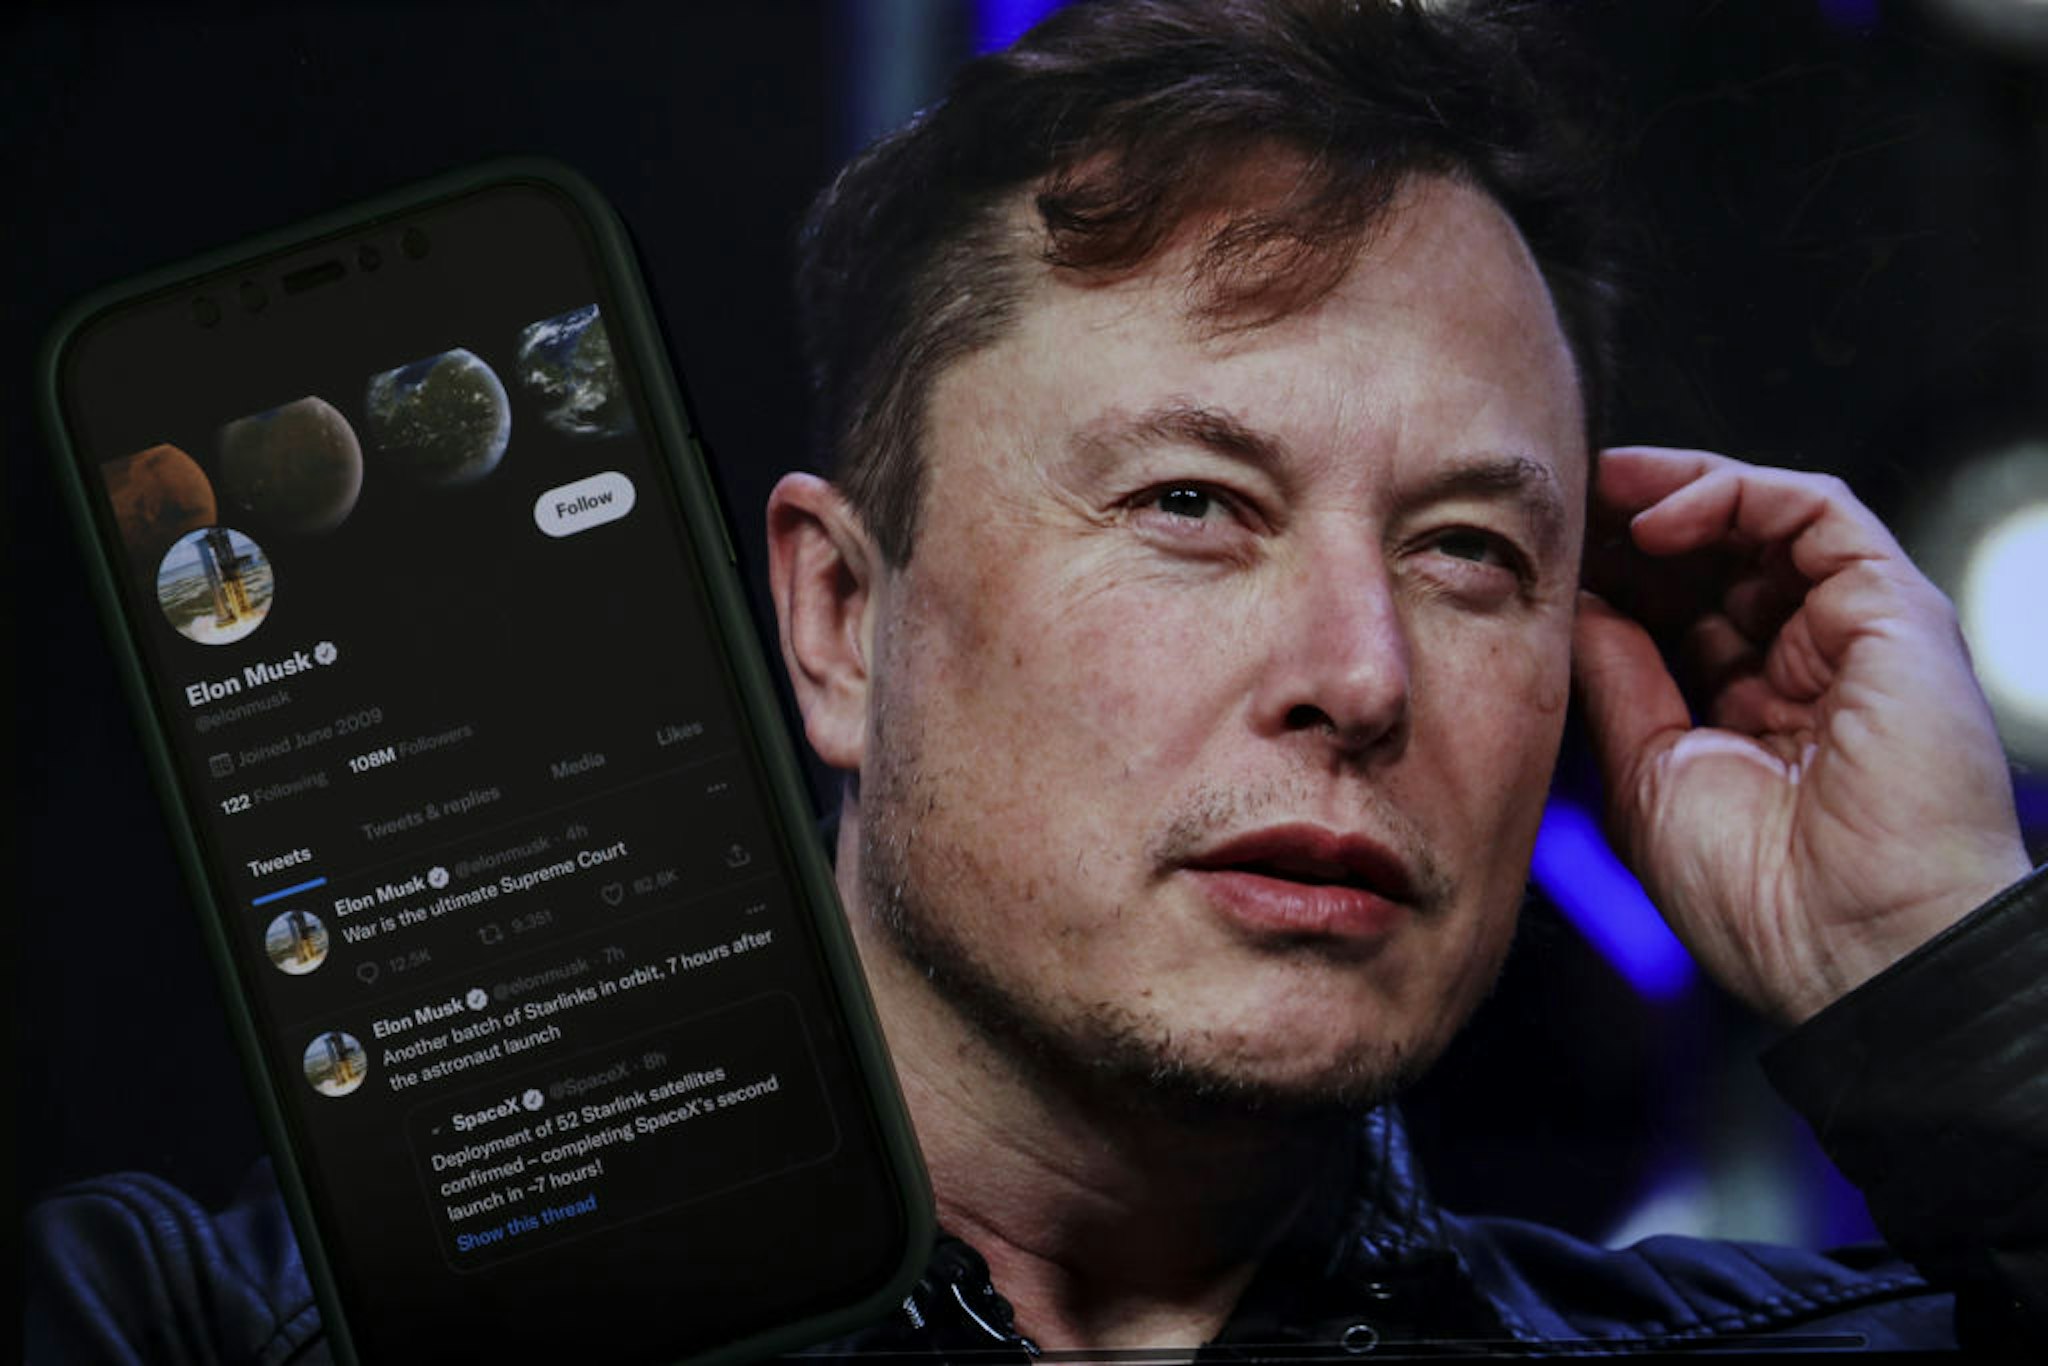 ANKARA, TURKIYE - OCTOBER 06: In this photo illustration, Elon Musk's twitter profile is displayed on a mobile phone and the image of him is seen on a computer screen on back of it in Ankara, Turkiye on October 06, 2022. Muhammed Selim Korkutata / Anadolu Agency